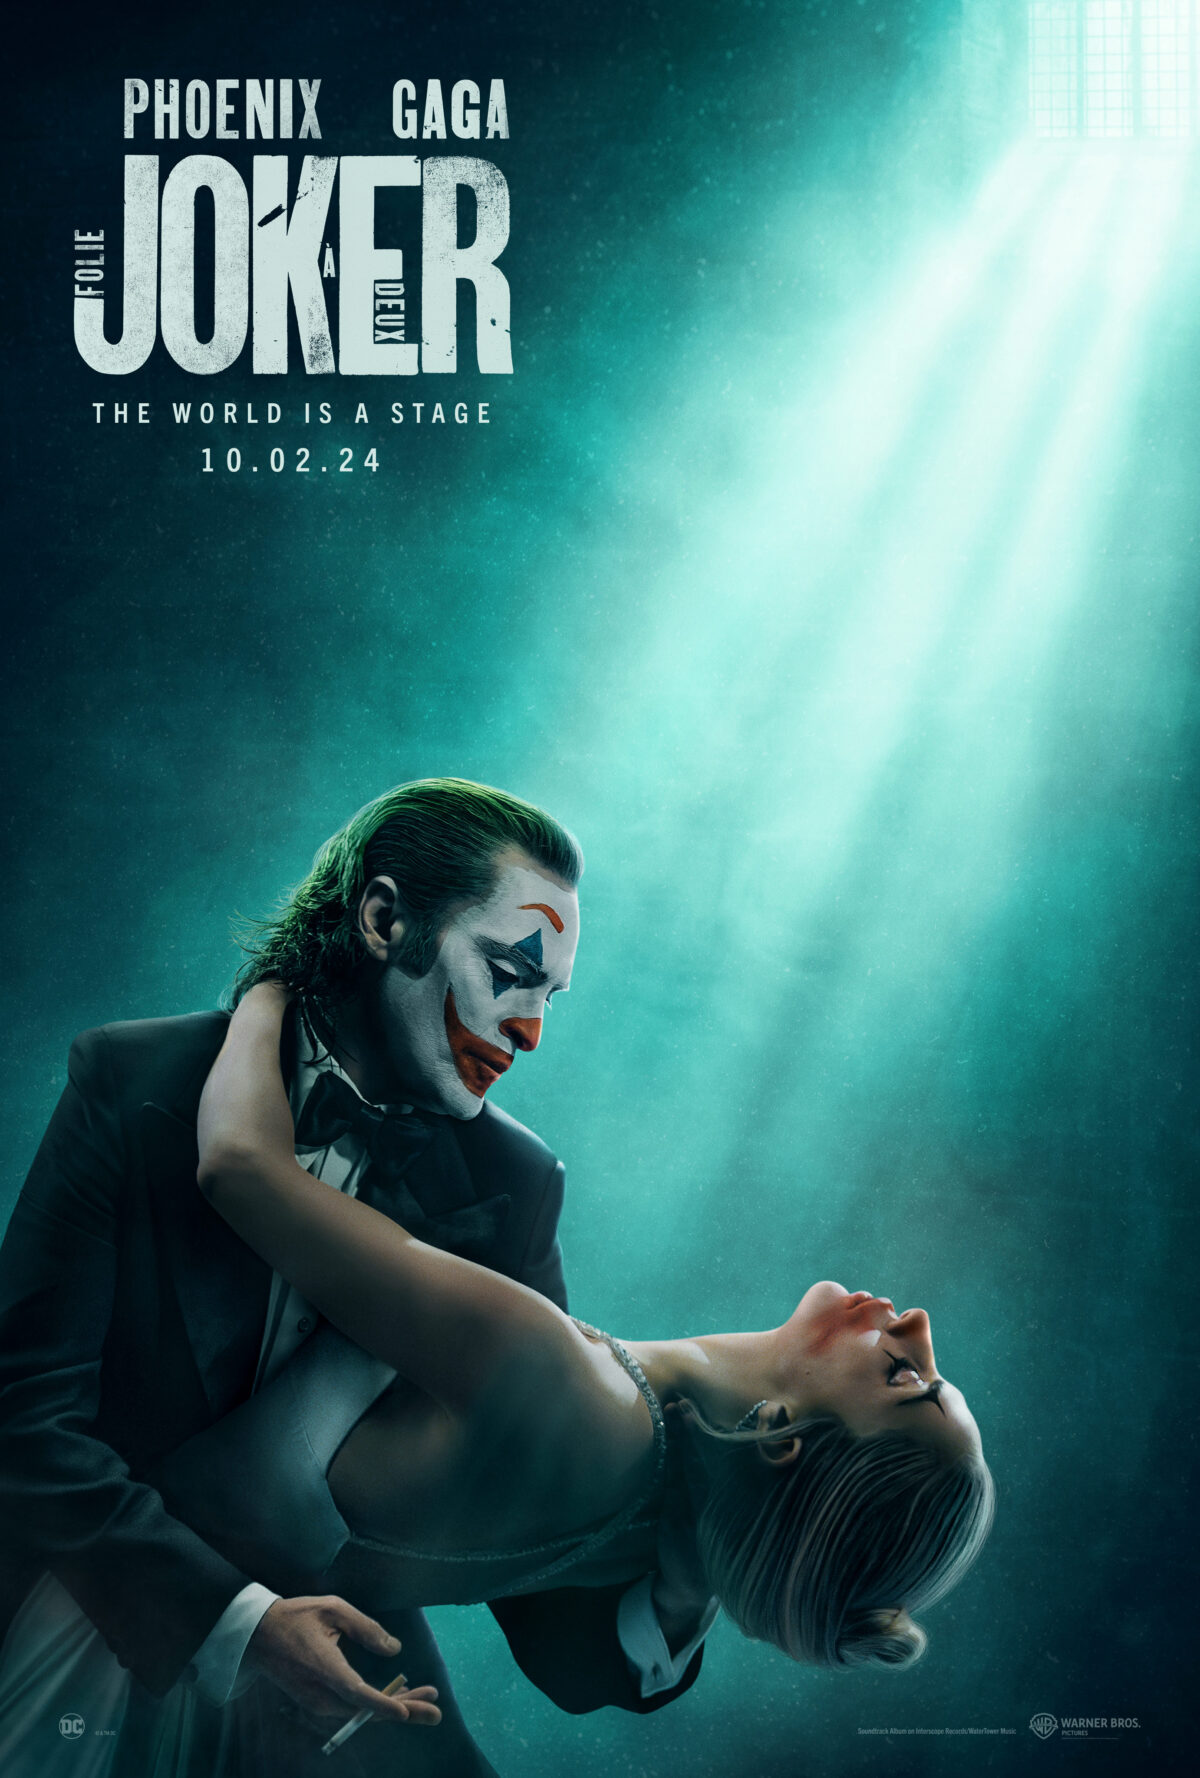 Lady Gaga and Joaquin Phoenix in Joker: Folie à Deux official movie poster | Image: Warner Bros. Pictures